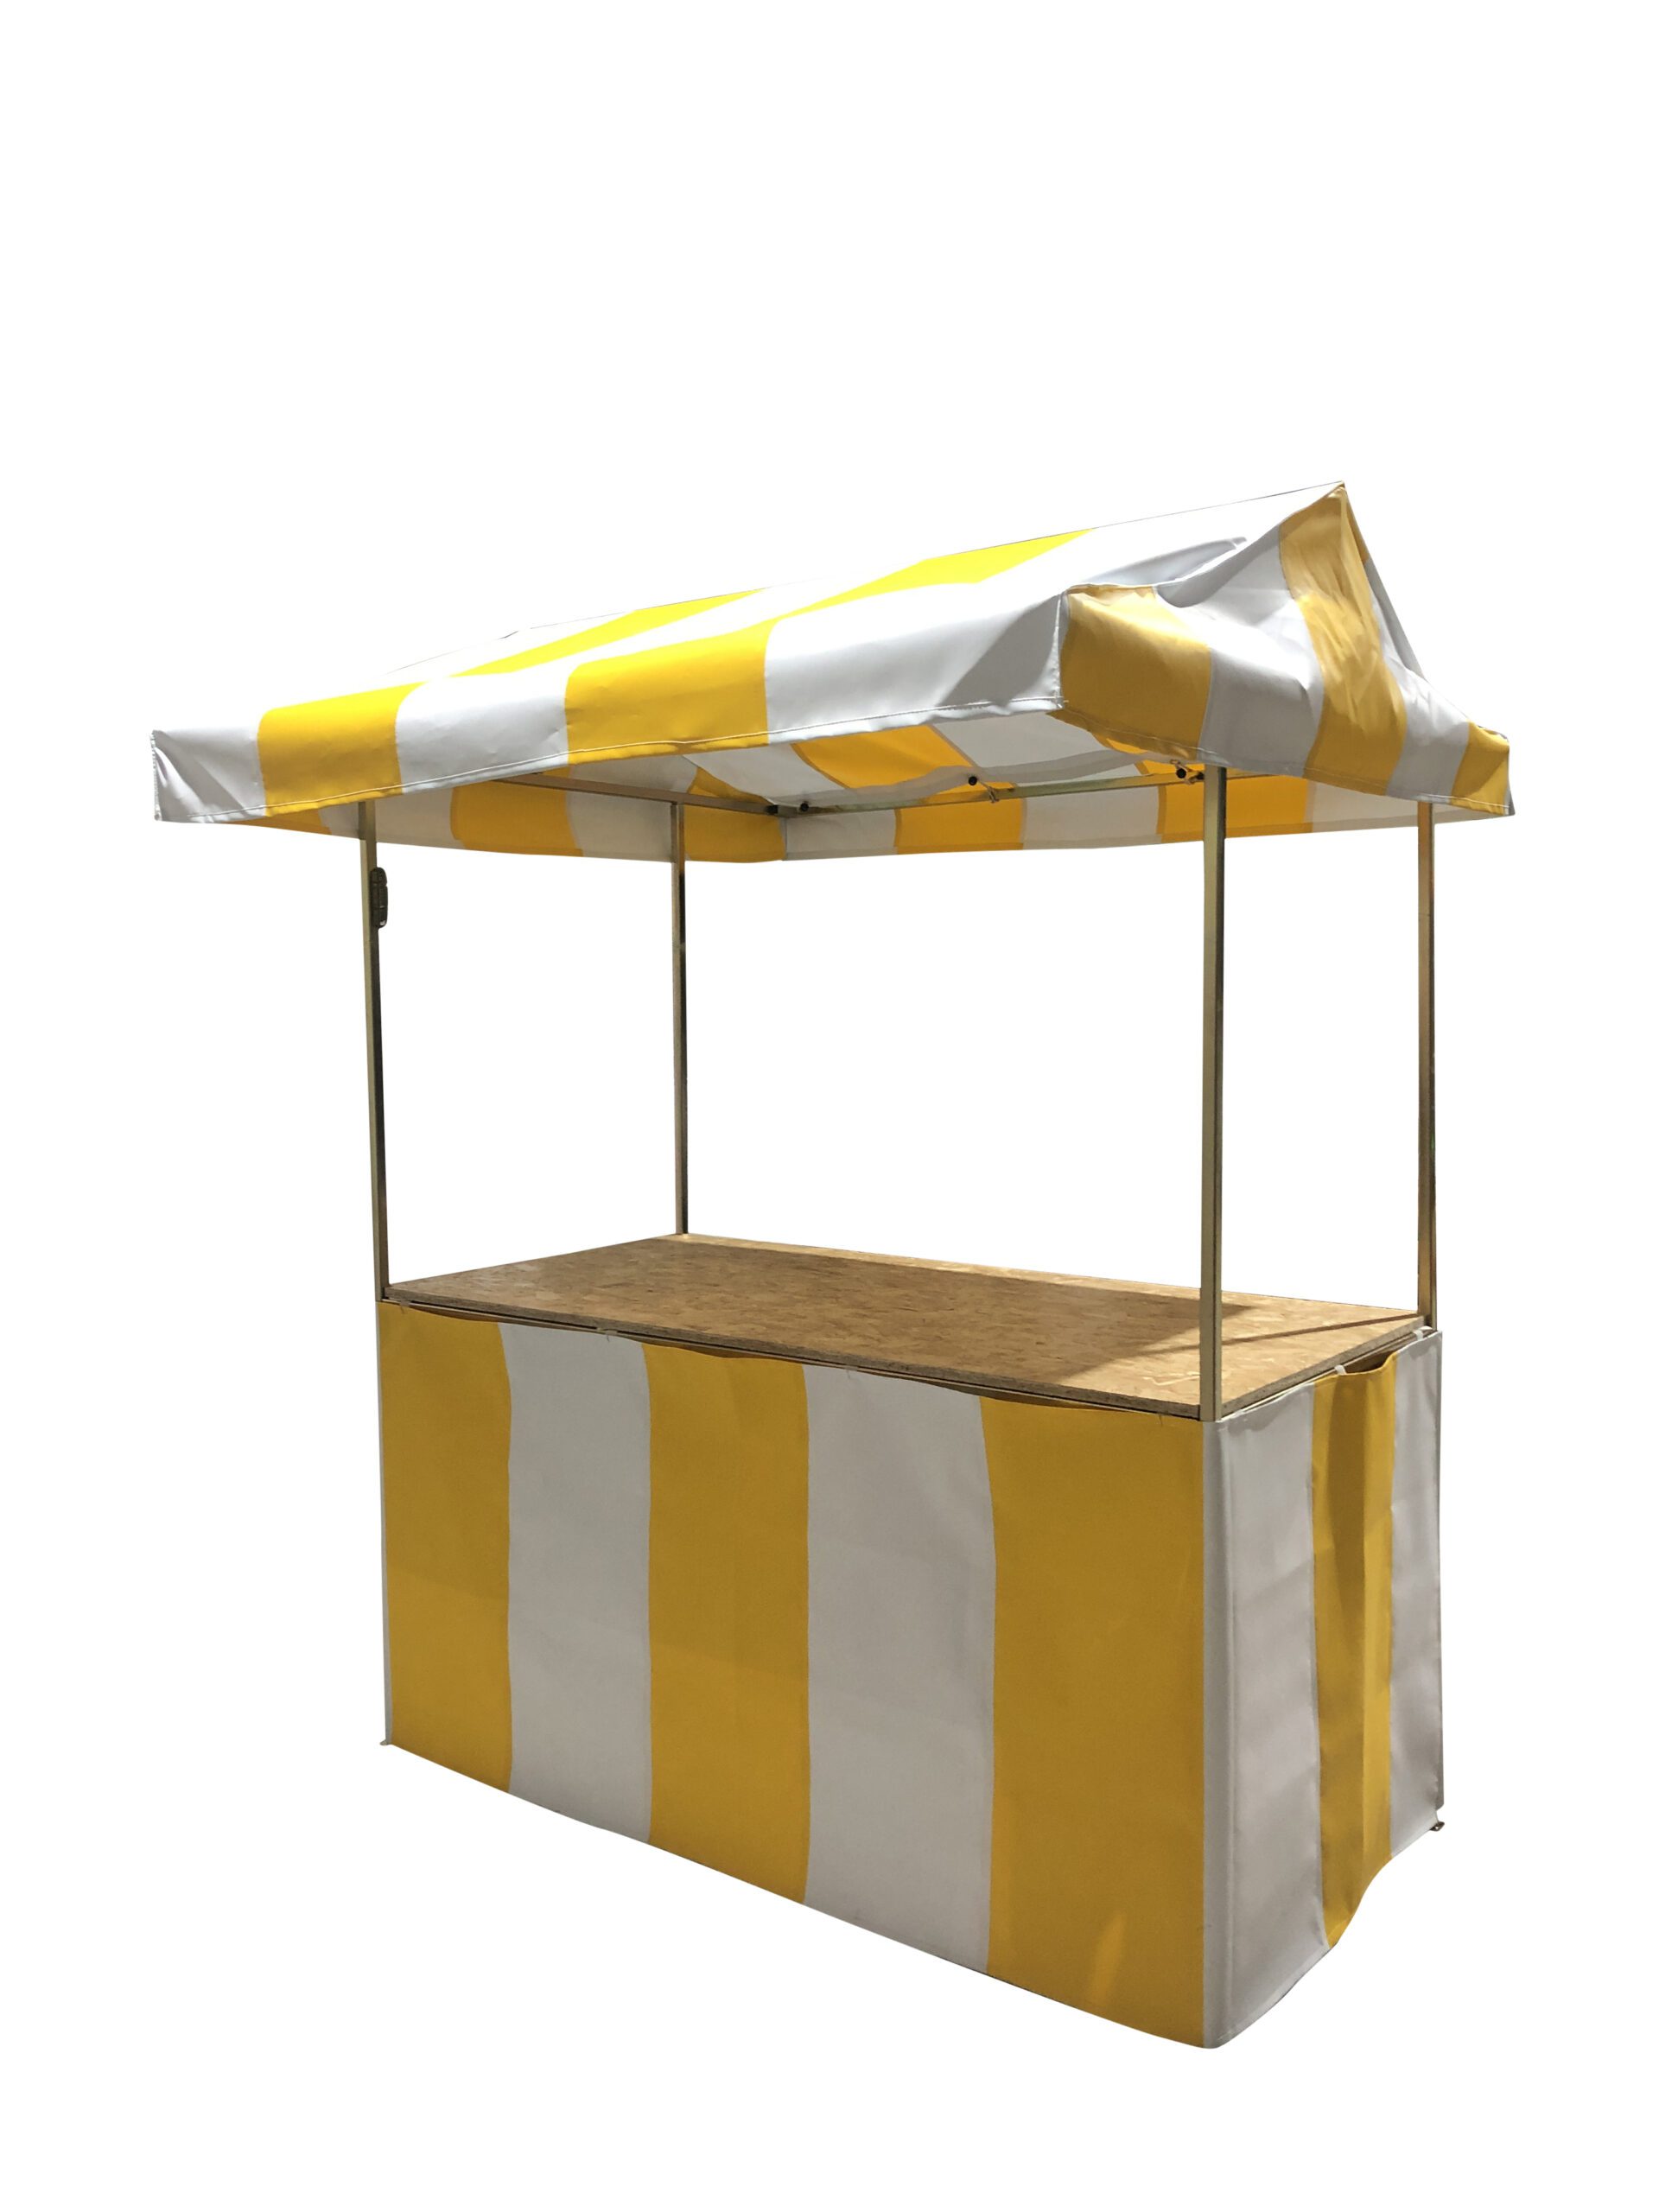 Yellow and white striped 6' x 3' Market stall